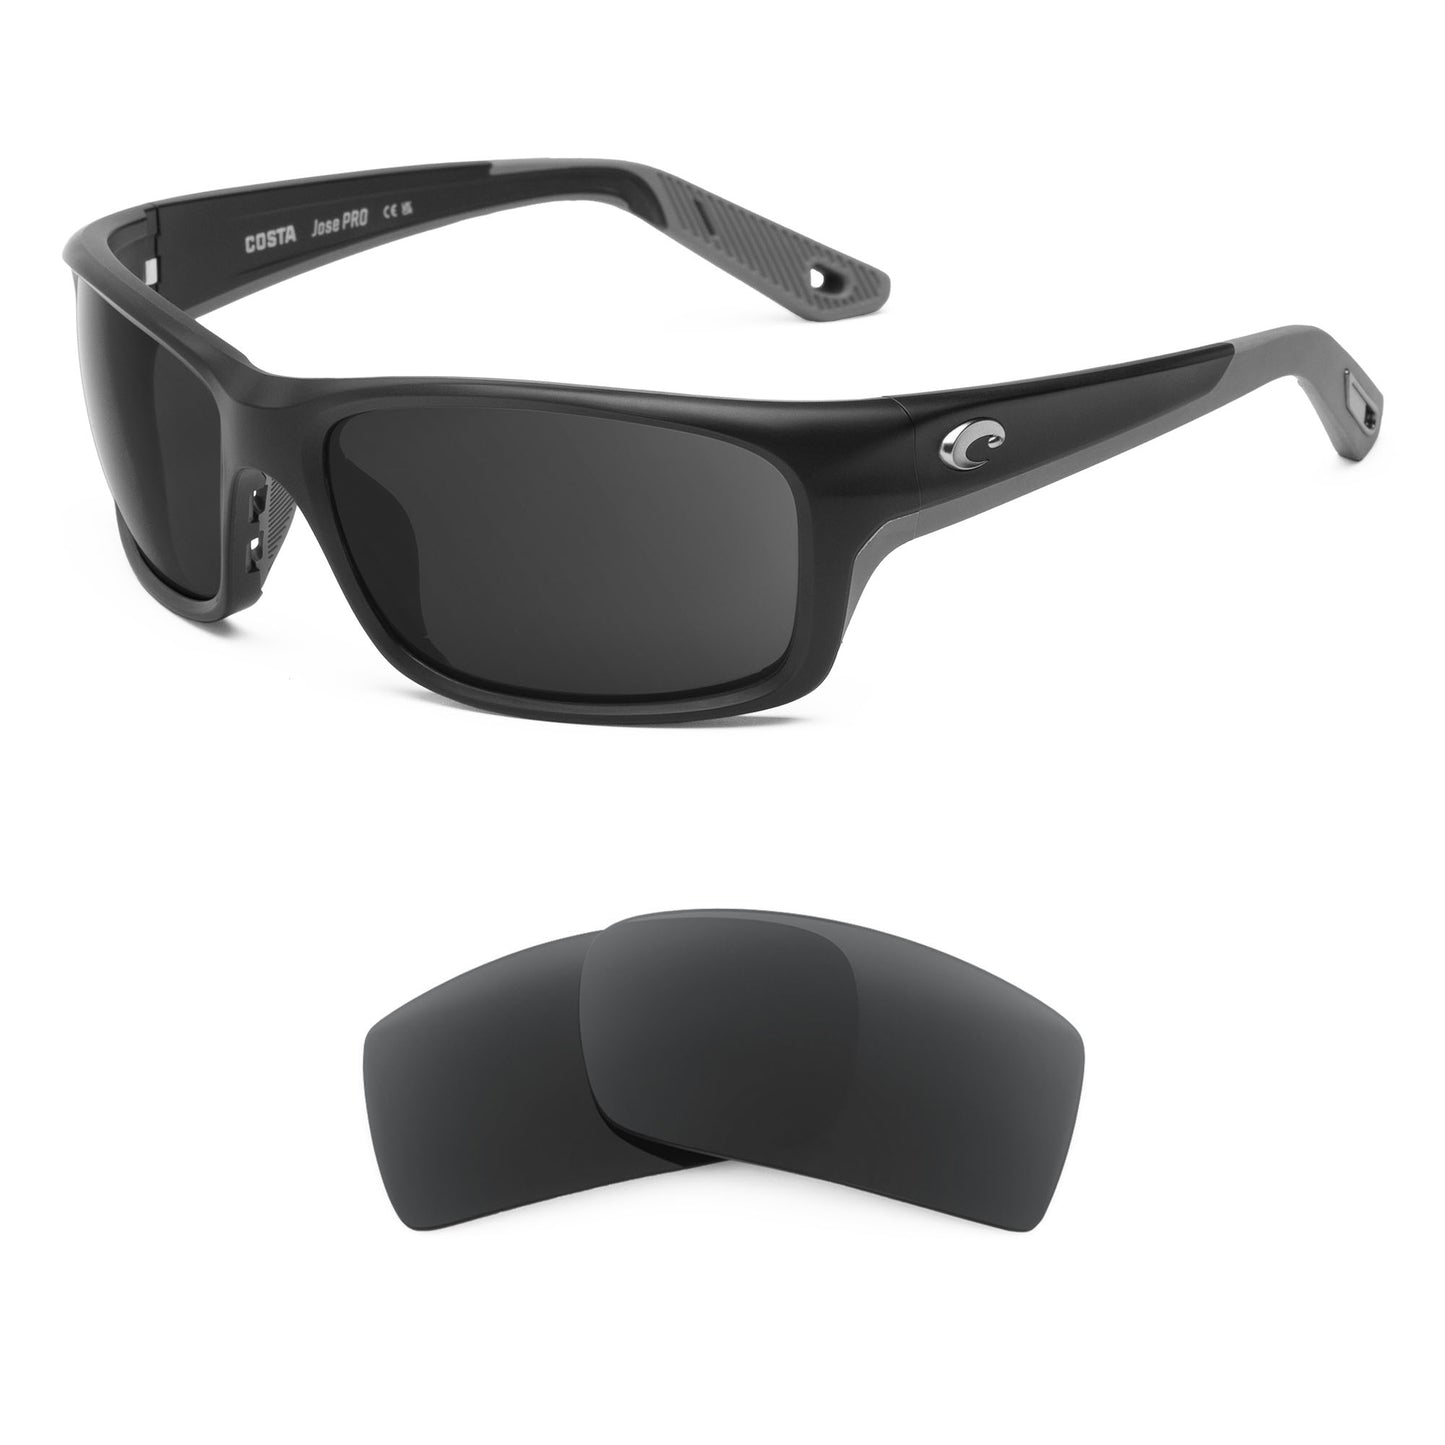 Costa Jose Pro sunglasses with replacement lenses